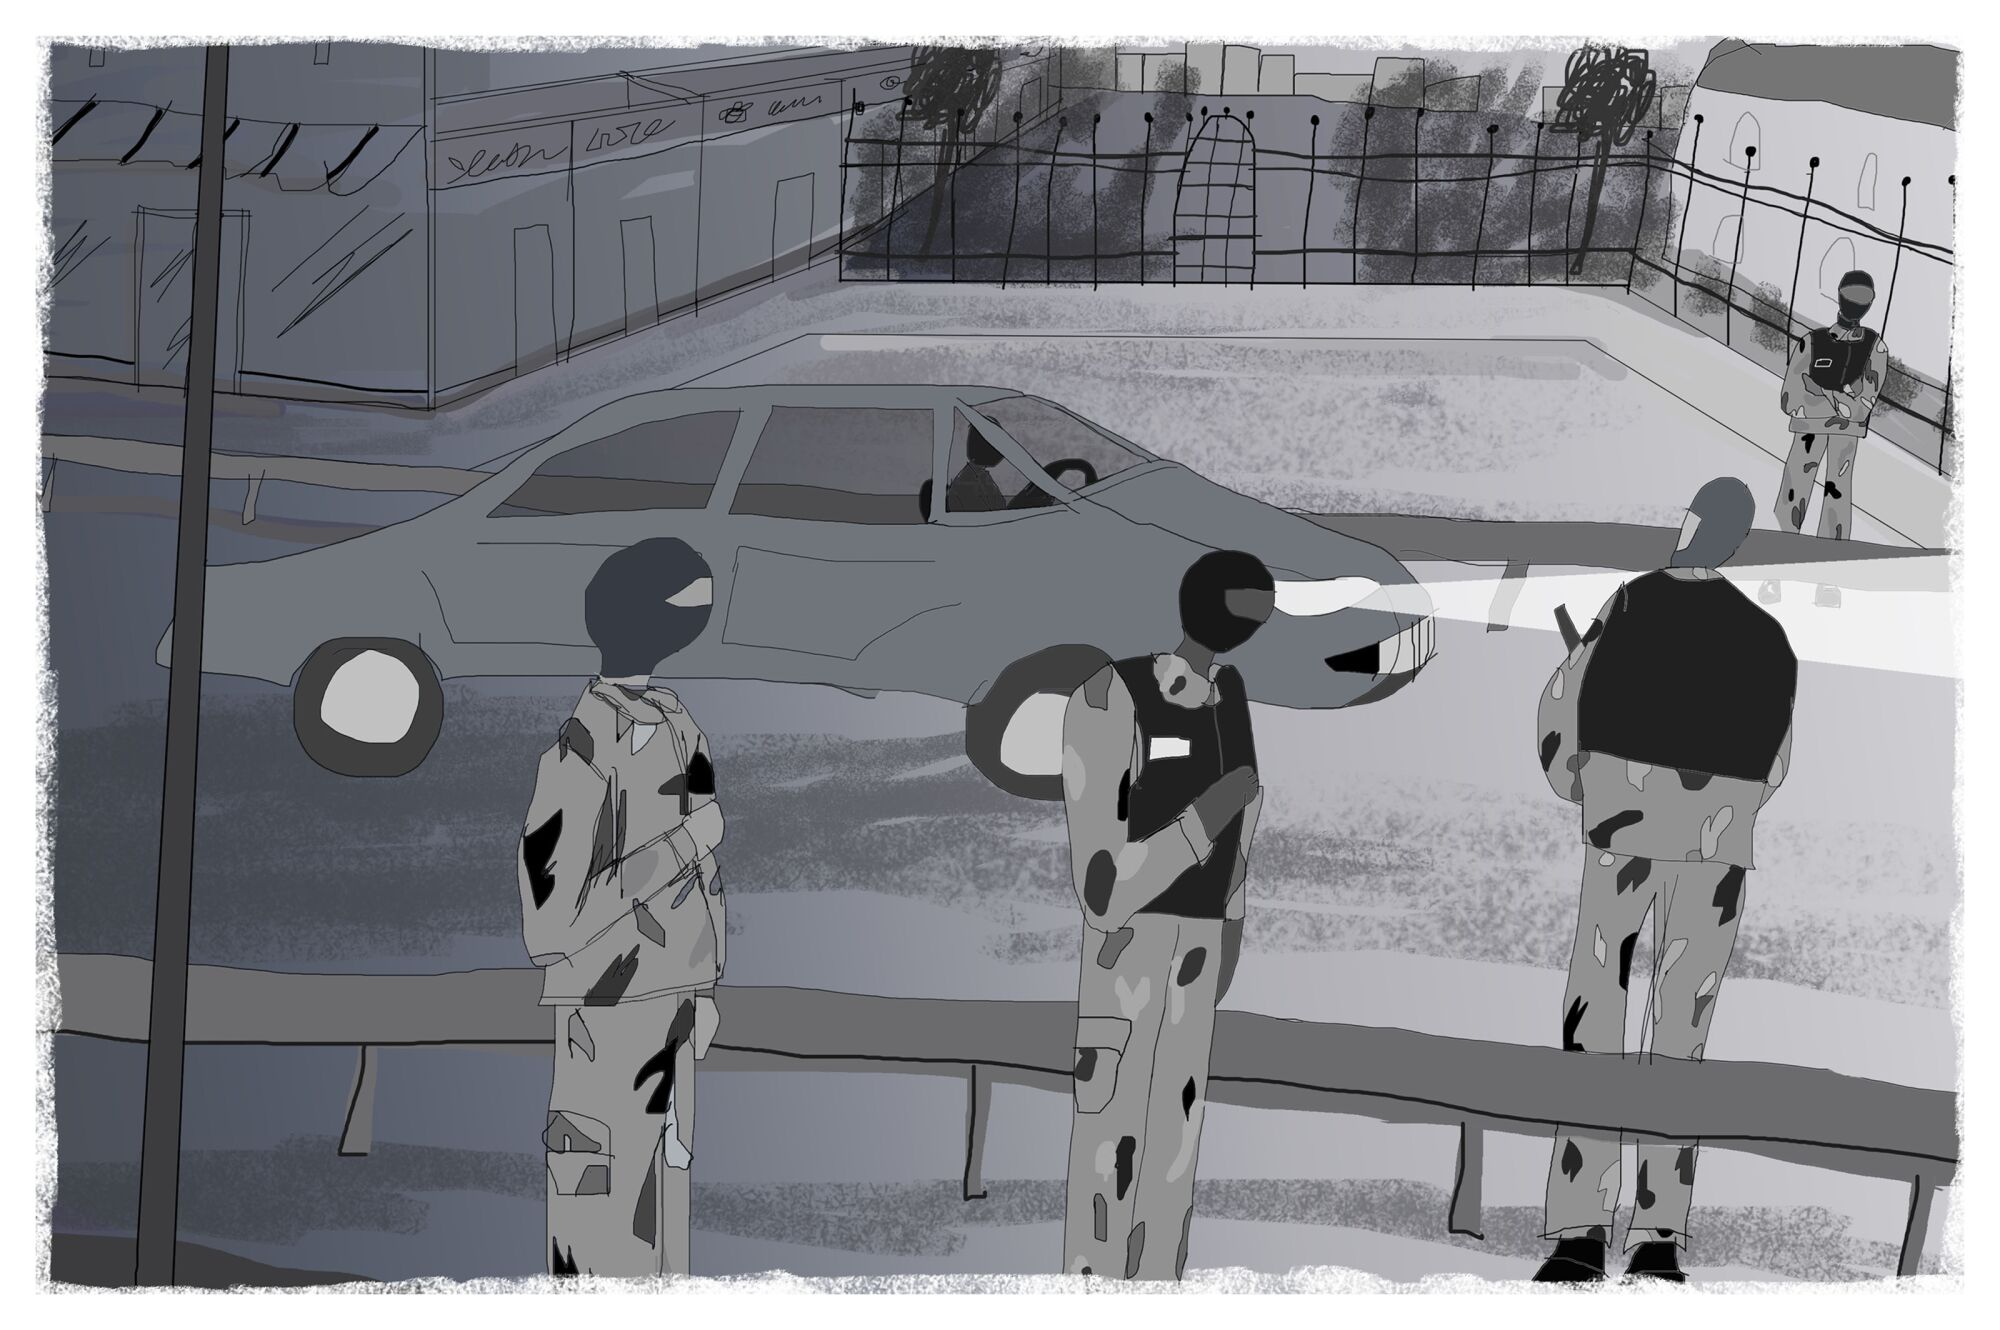 Black and white illustration of a car driving past National Guardsmen in the foreground and background.